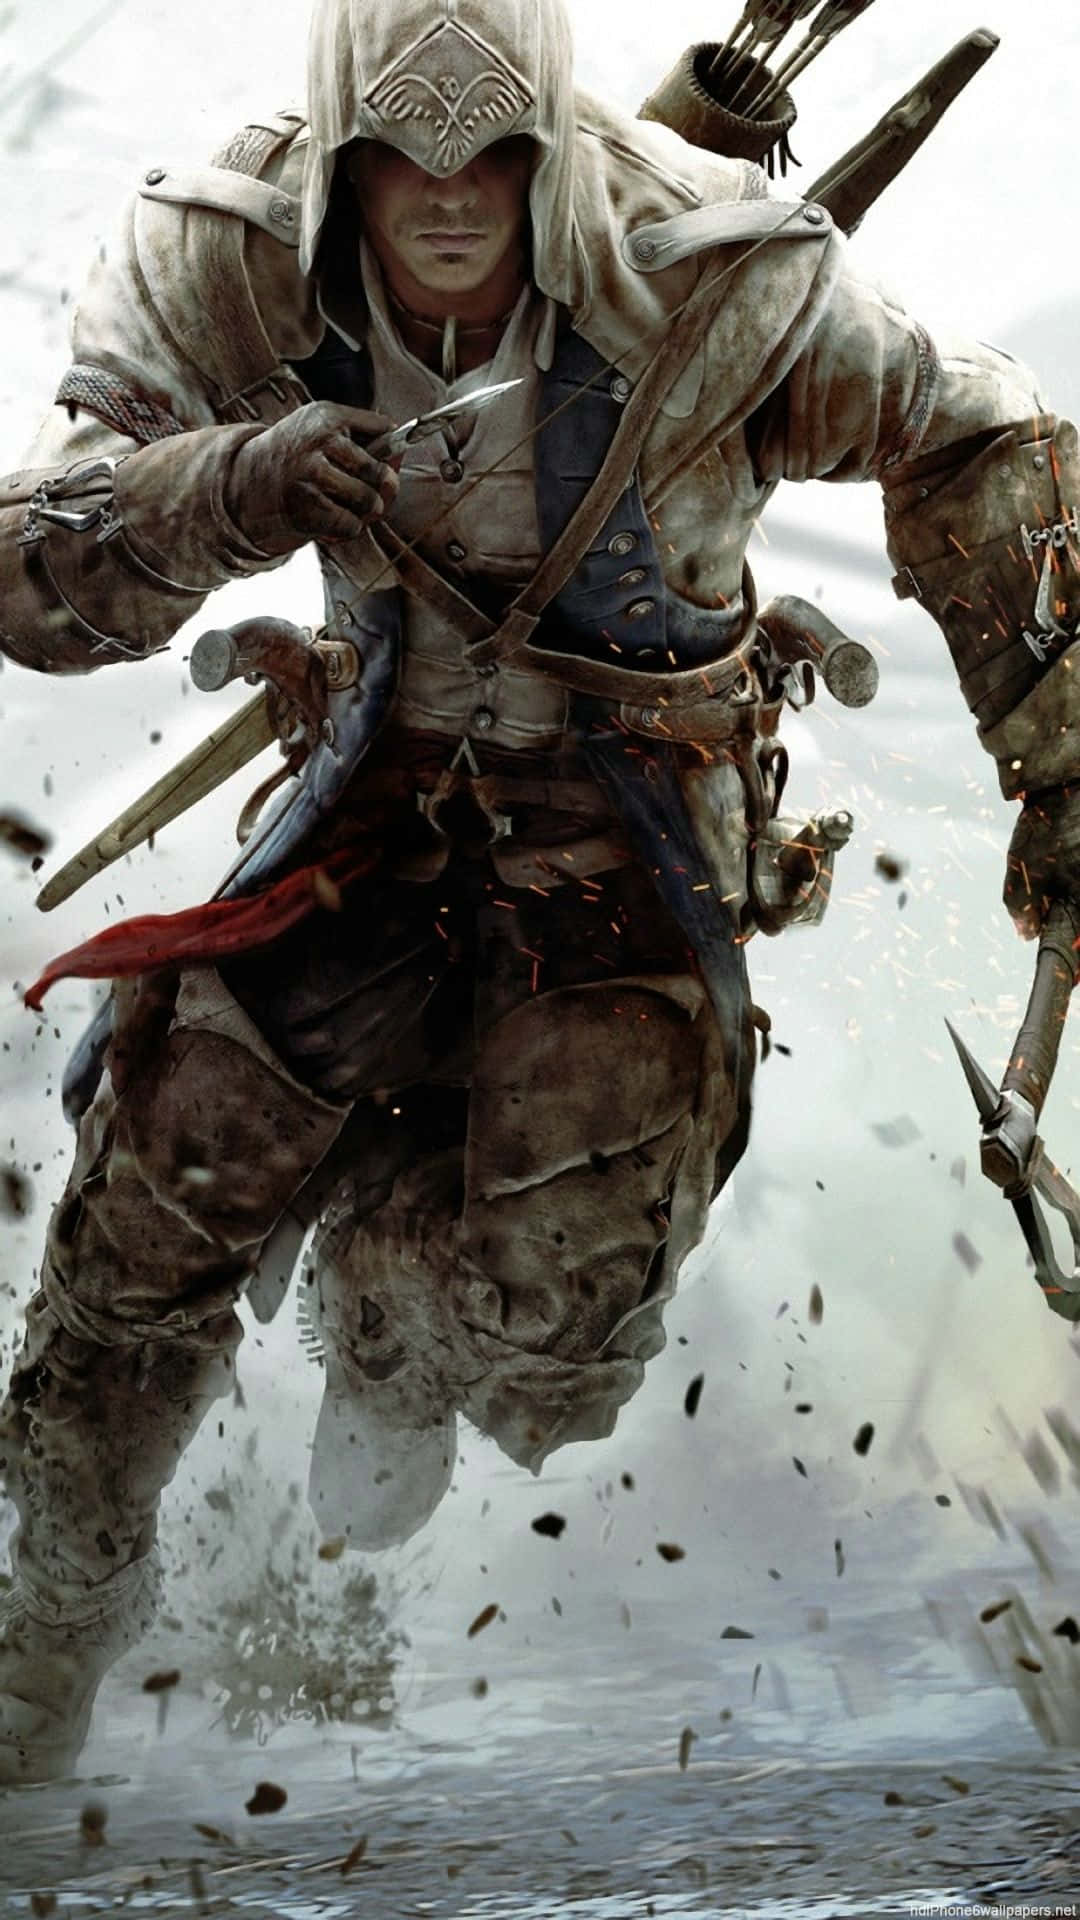 Get Ready To Explore The World With Assassins Creed On Your Iphone